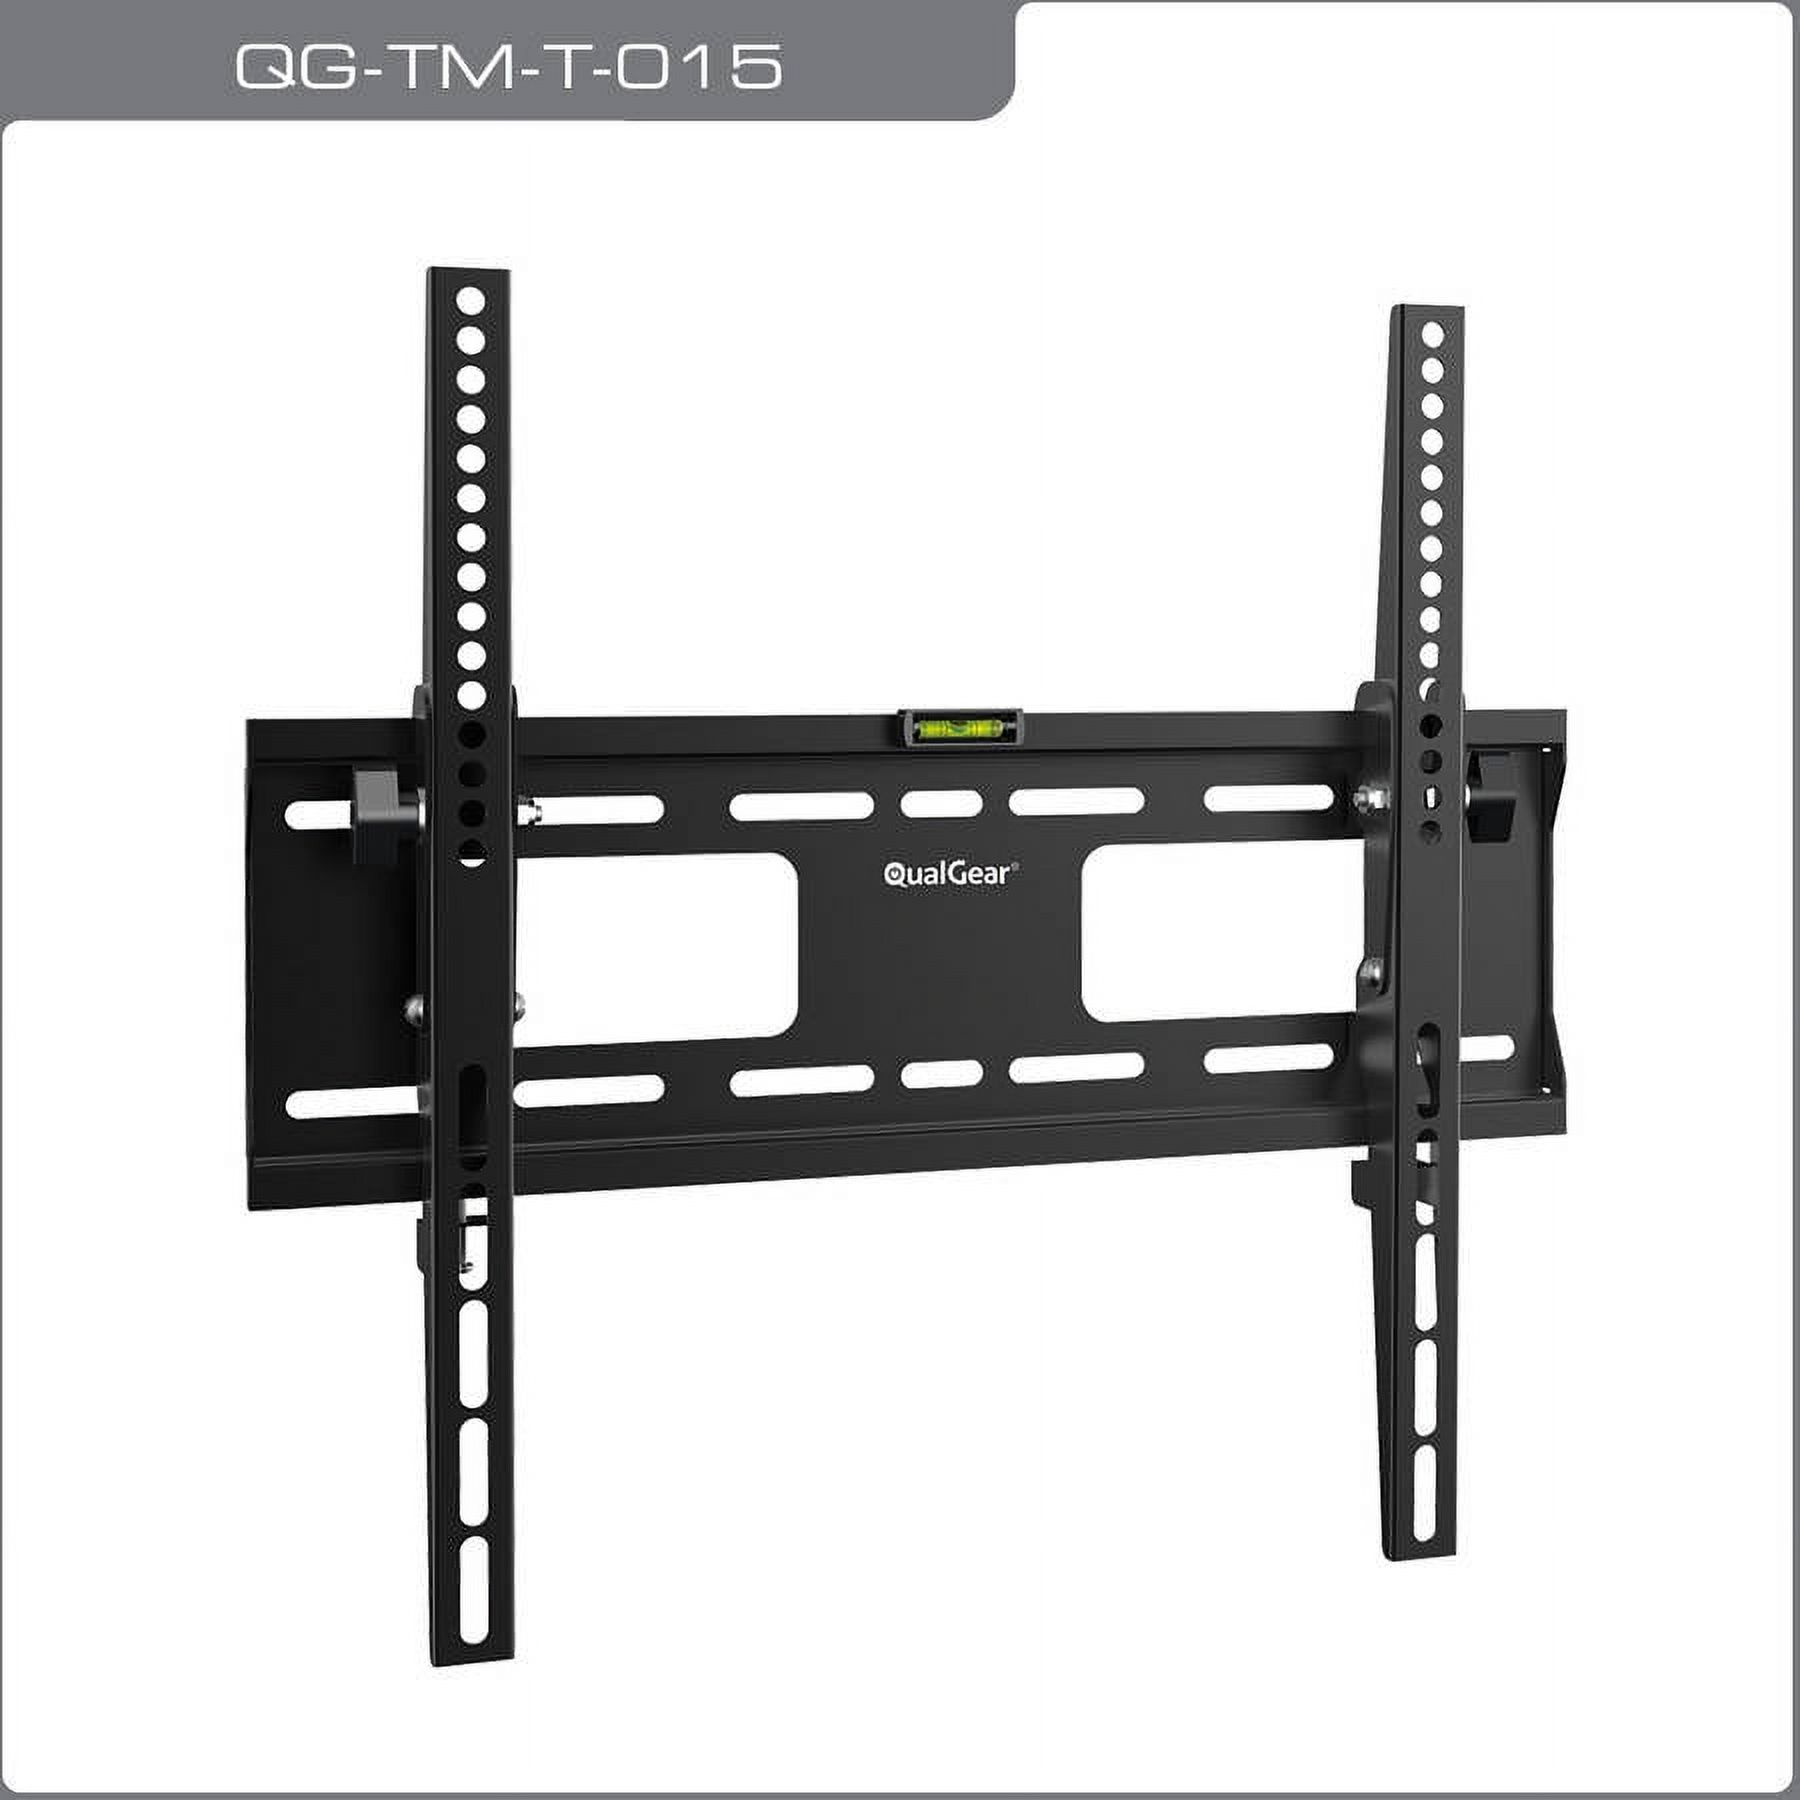 QualGear QG-TM-T-015 Universal Low-Profile Tilting Wall Mount for 32"-55" LED TVs - image 1 of 3